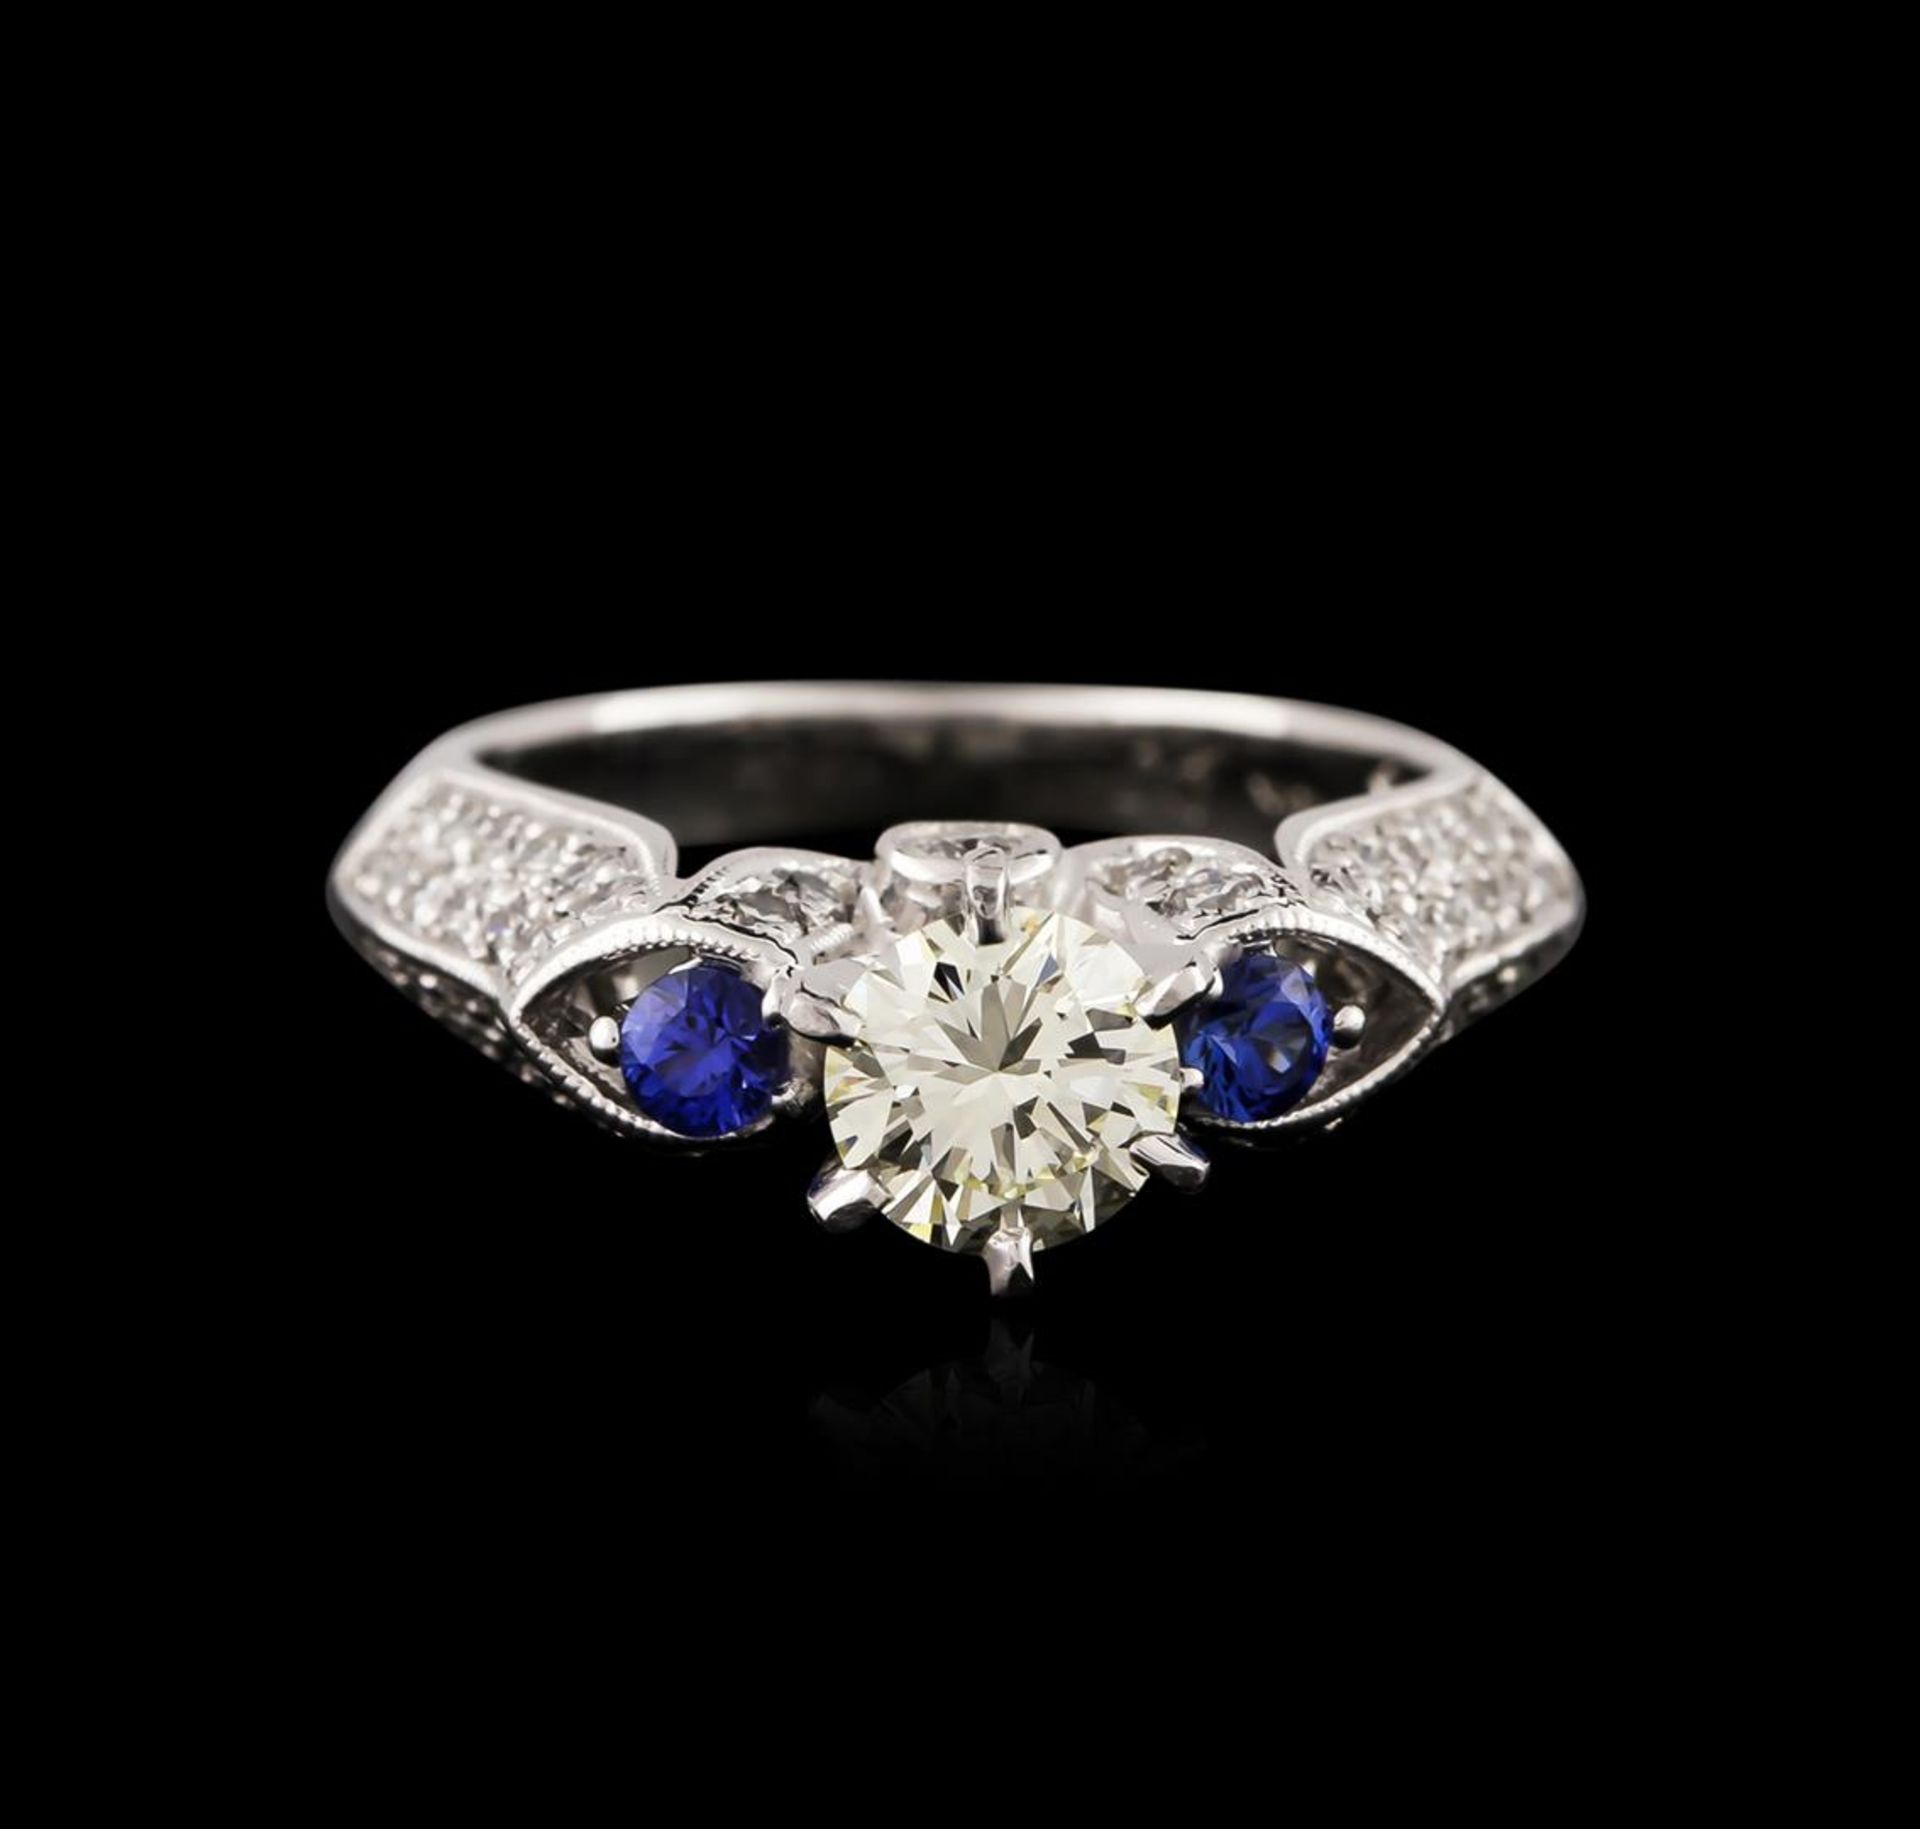 18KT White Gold 1.30 ctw Sapphire and Diamond Ring - Image 2 of 4